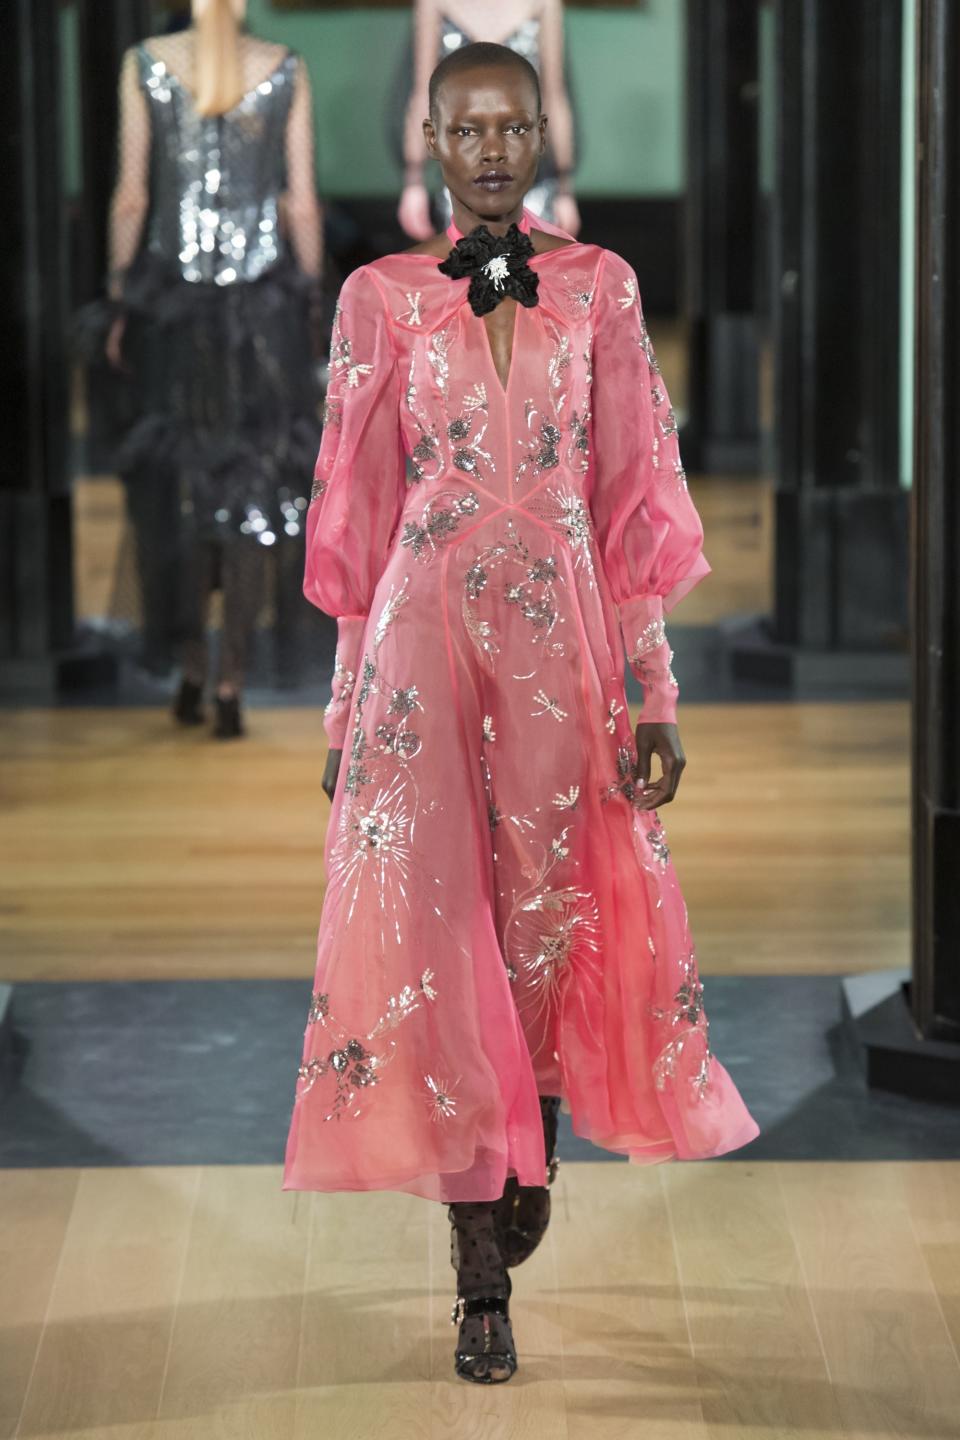 From Richard Quinn’s exuberant florals to Erdem’s nostalgic romance, these are the 10 best collections from London Fashion Week this season.